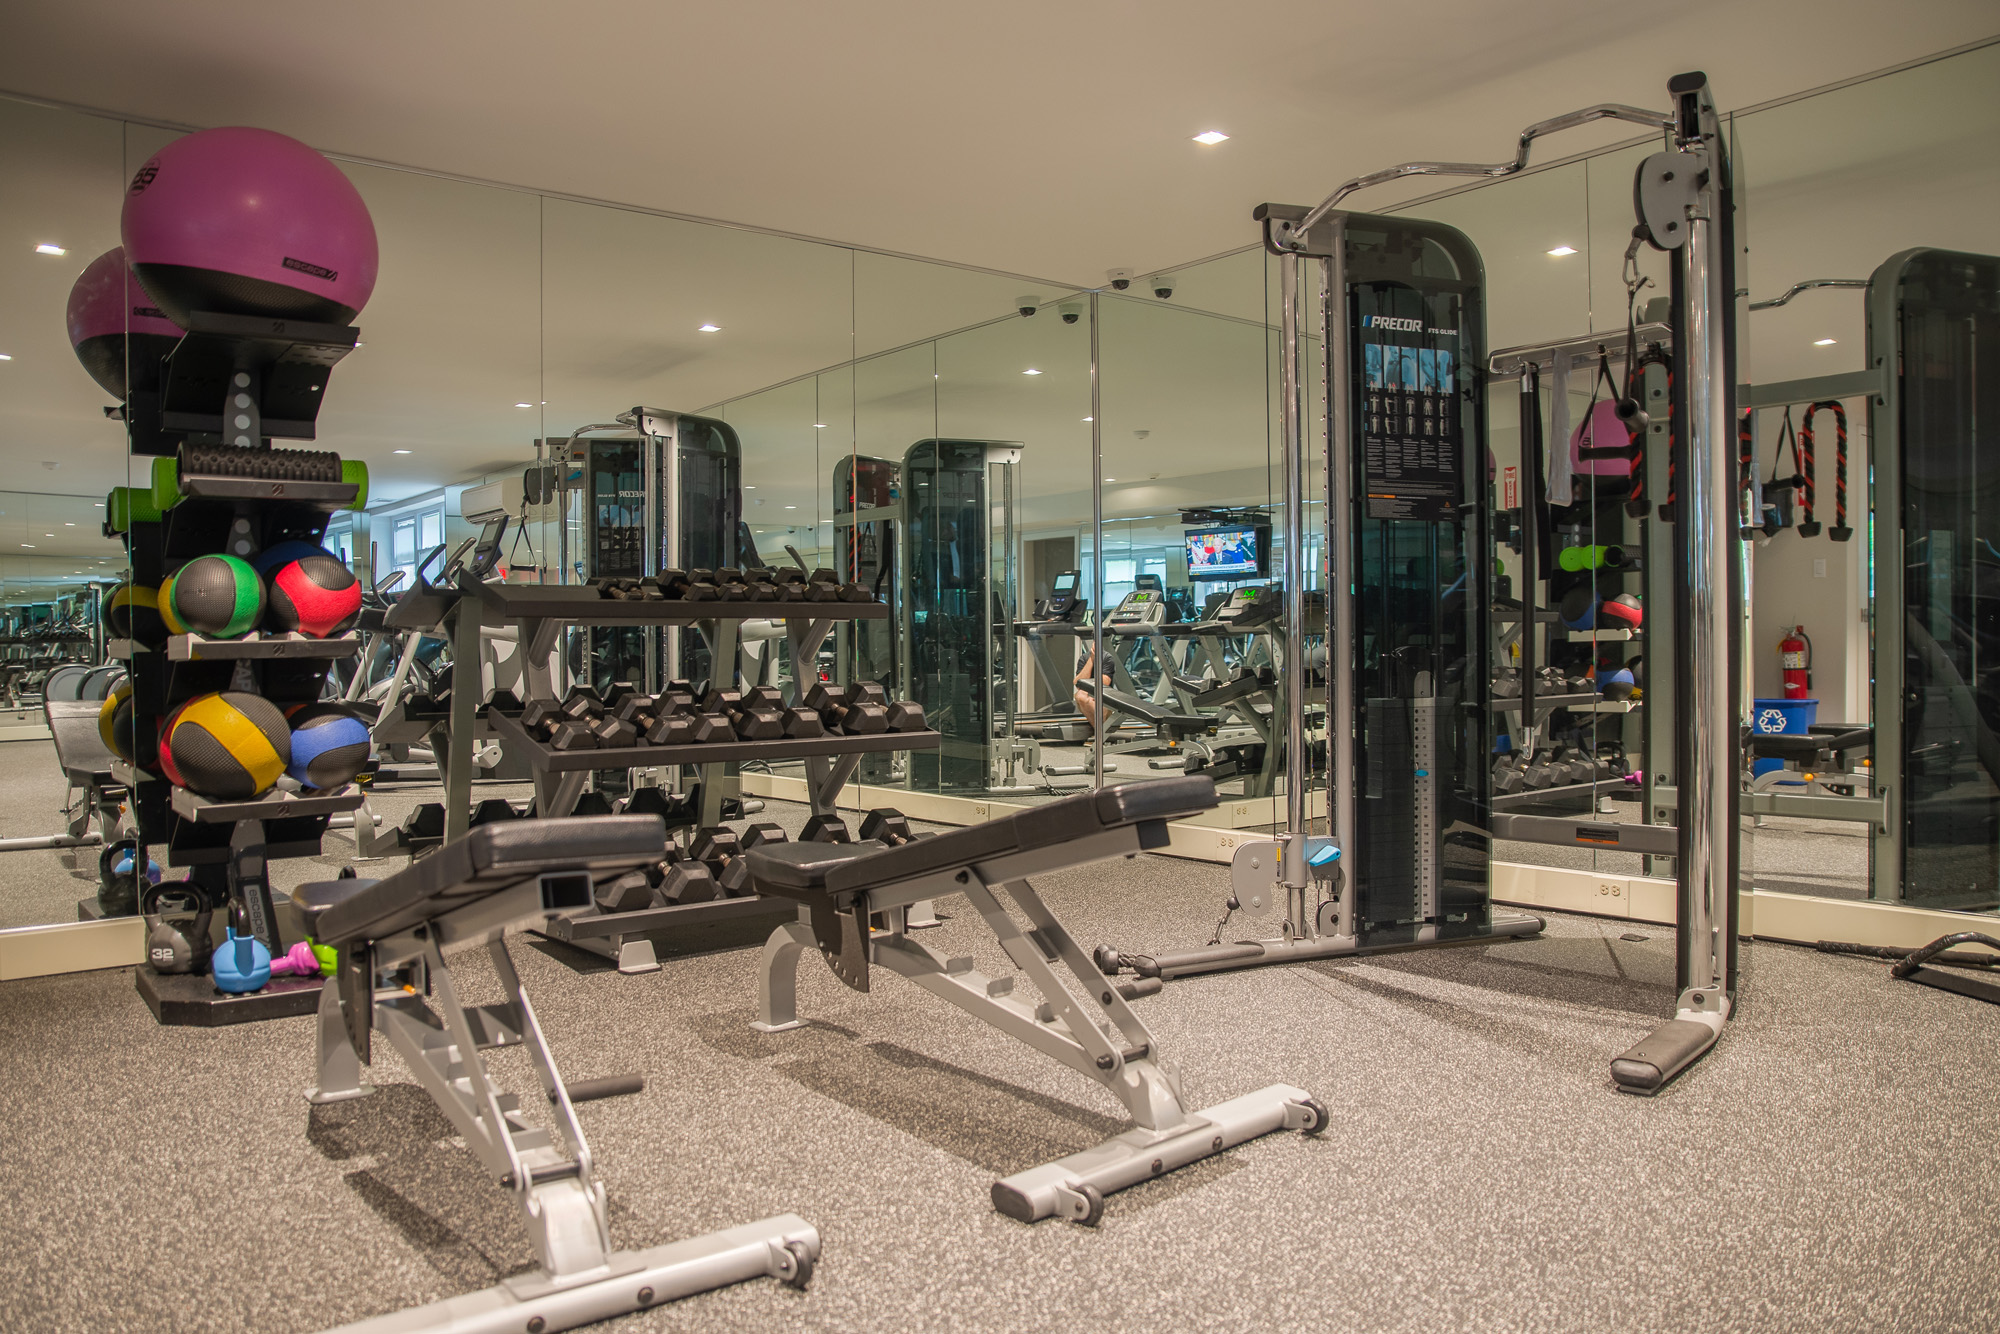 Fitness center with treadmills, ellipitcals, stationary bike, and free weights